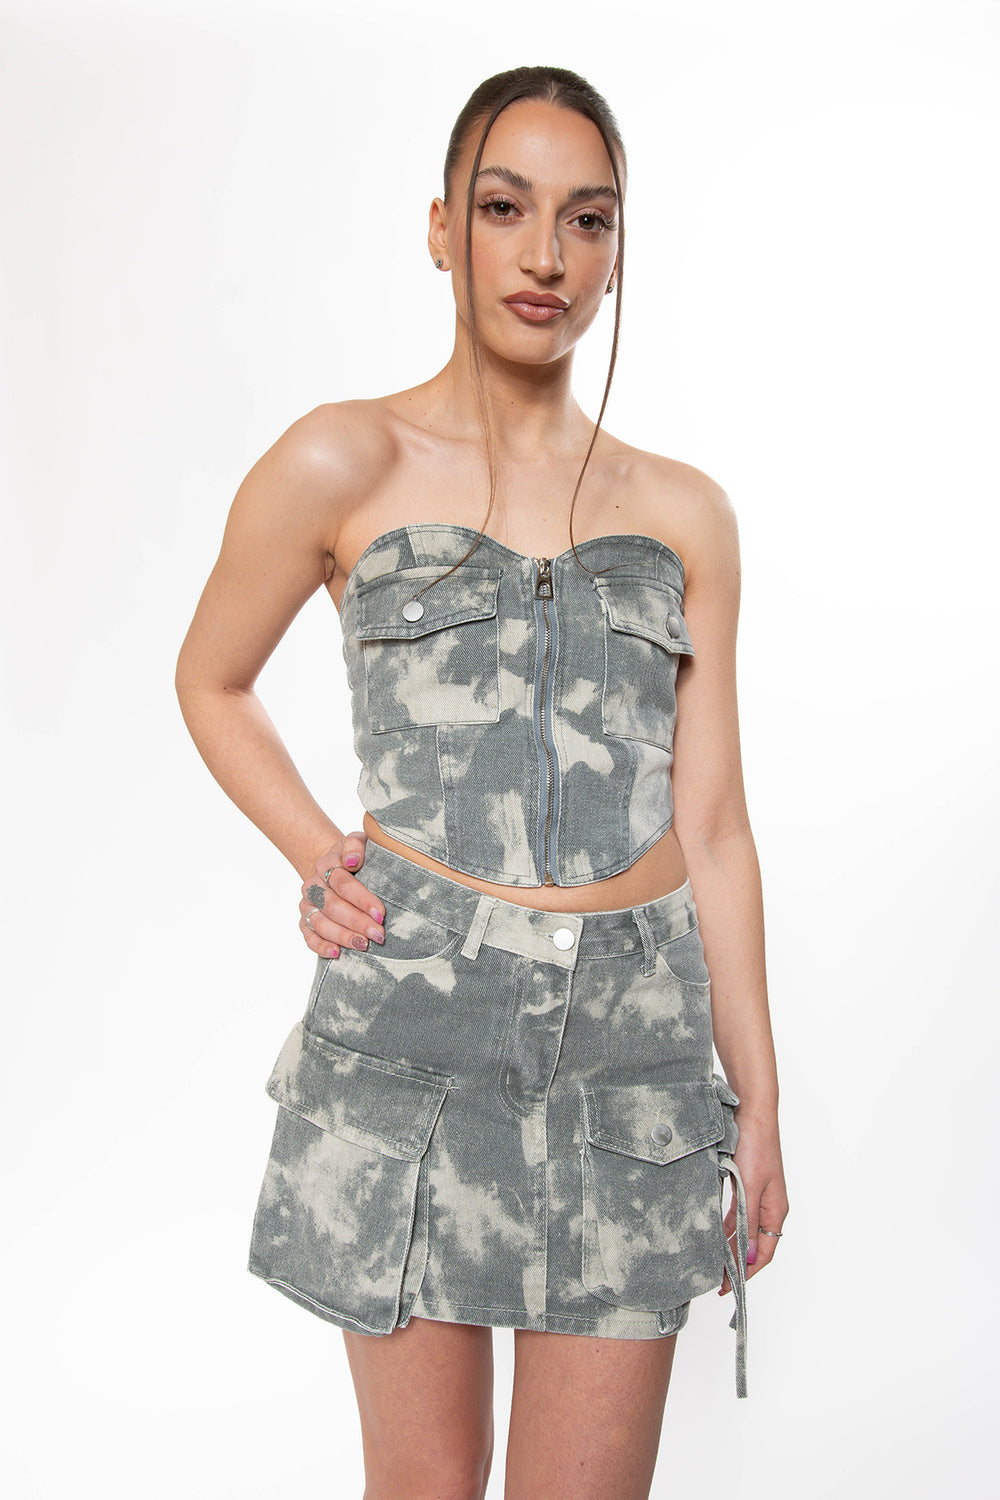 Yelynn Denim Corset Top - Camouflage Top Routines Fashion   